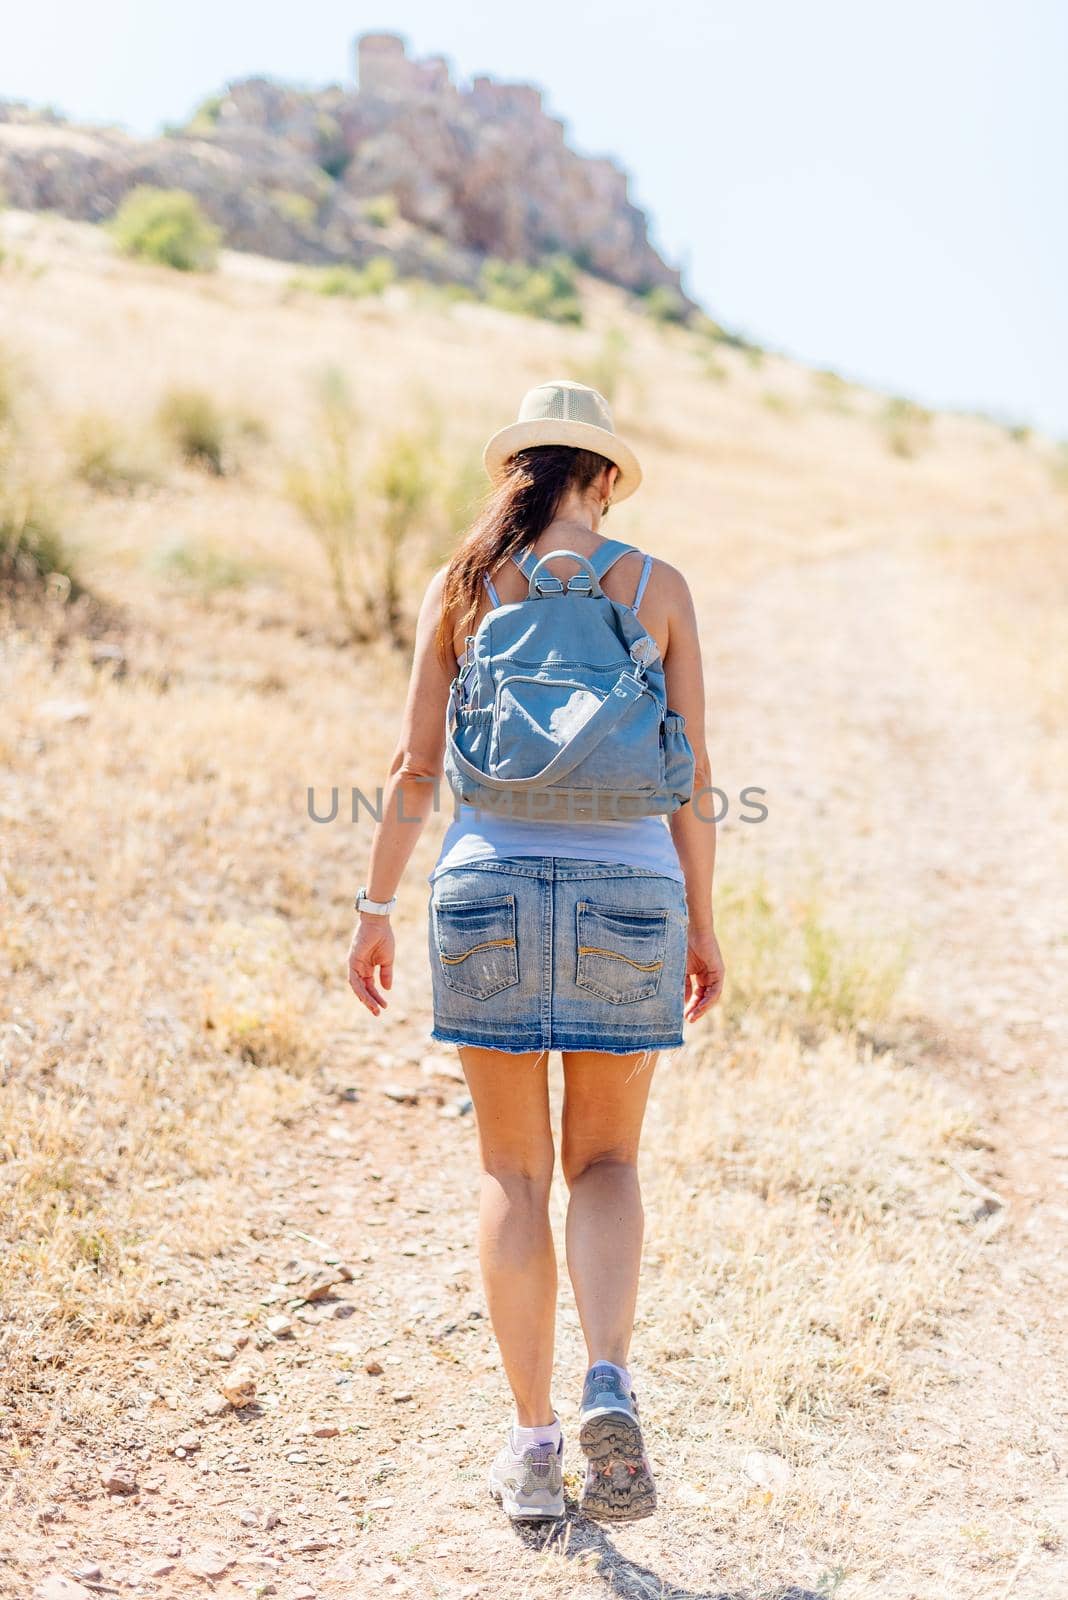 Woman with summer clothes and a backpack walking on a path in a dry grassy field with a castle in the background of the image out of focus. Peñas negras Castle in Toledo Spain